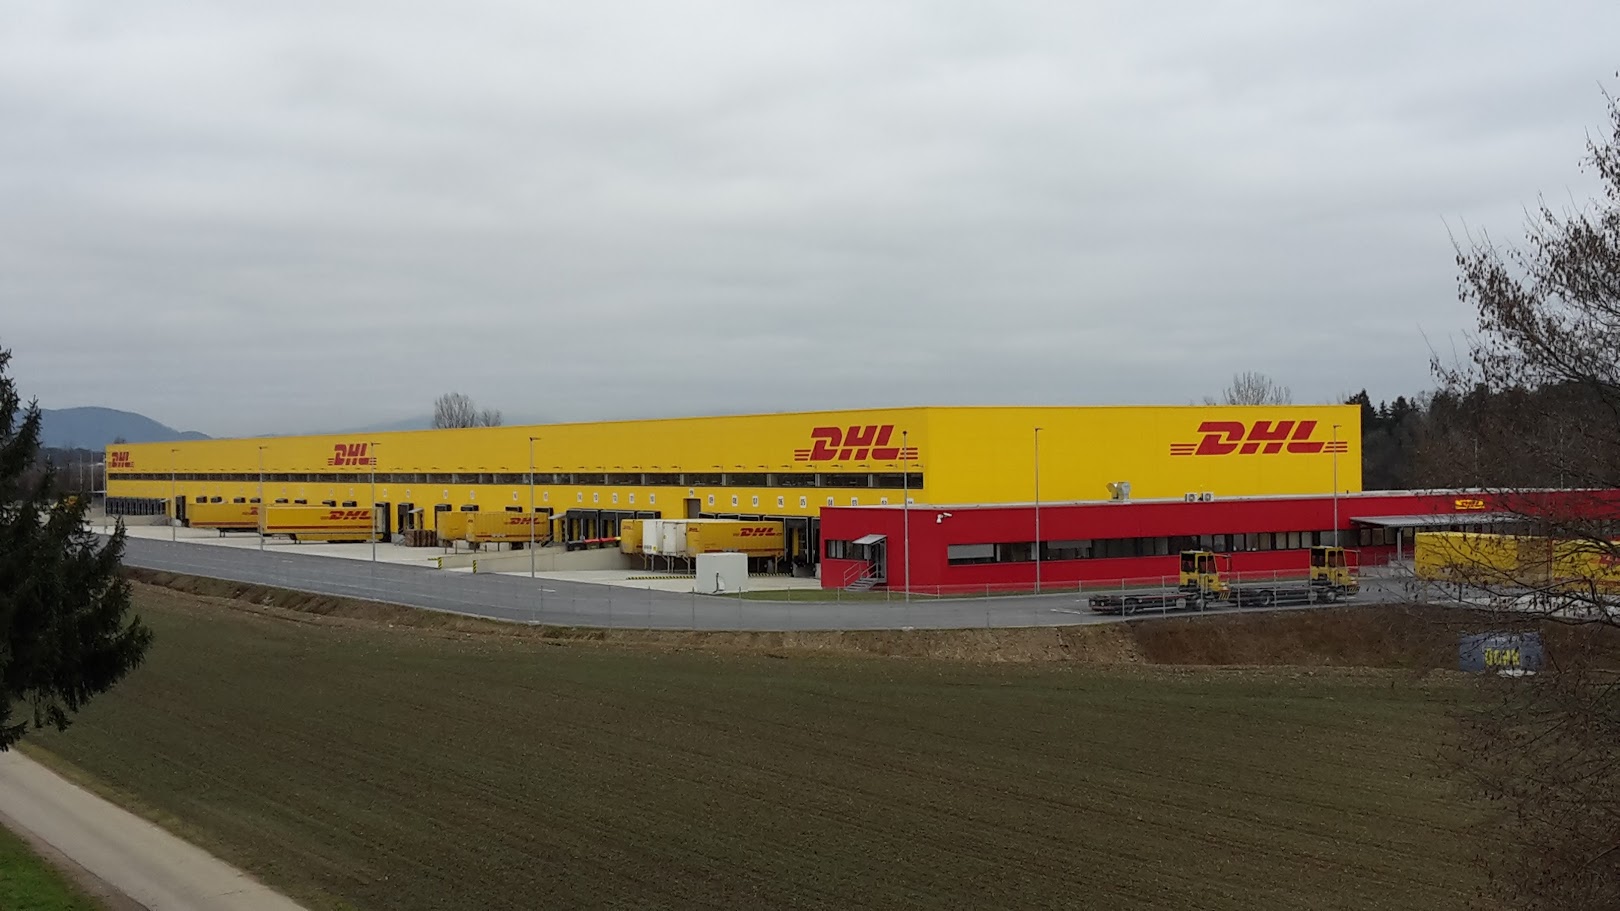 DHL opens fully automated parcel distribution centre in Graz